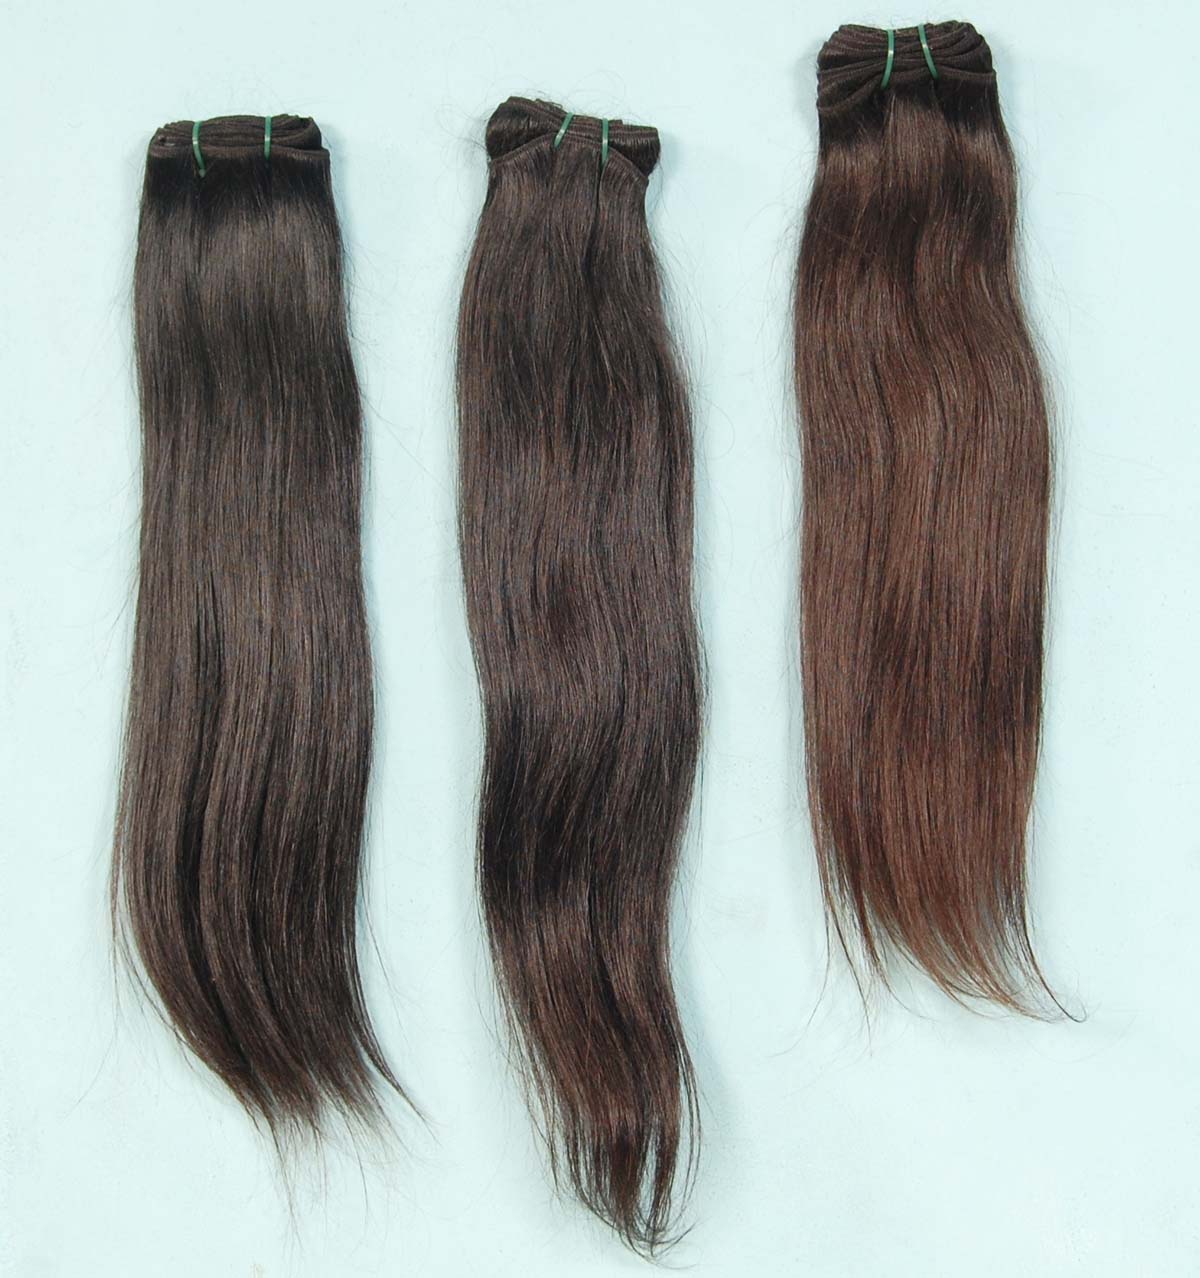 Fashioncrown Virgin Indian Hair, Length : 8inches to 24inches